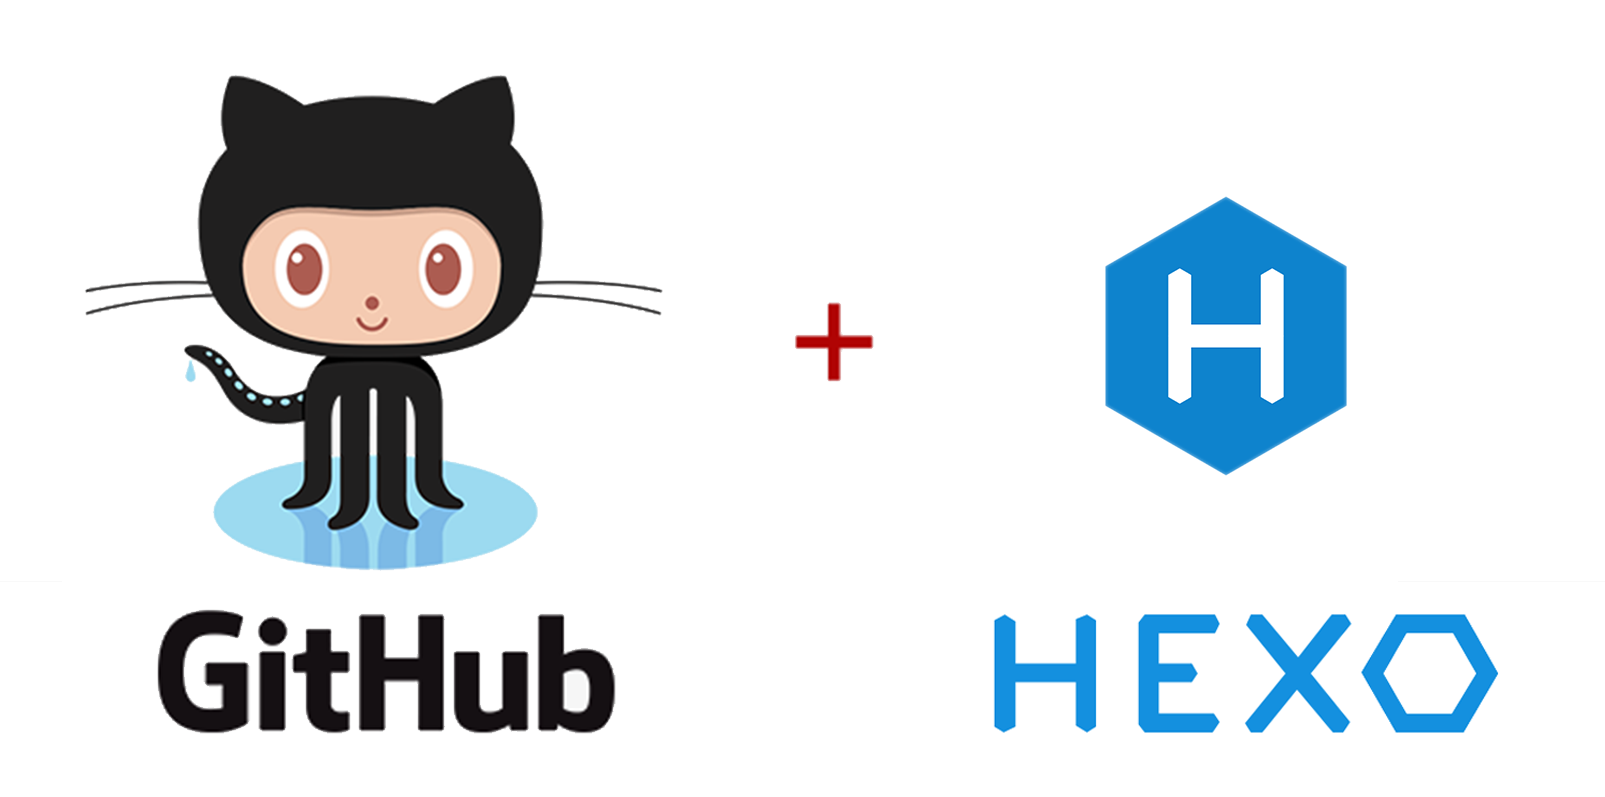 GitHub Pages + Hexo